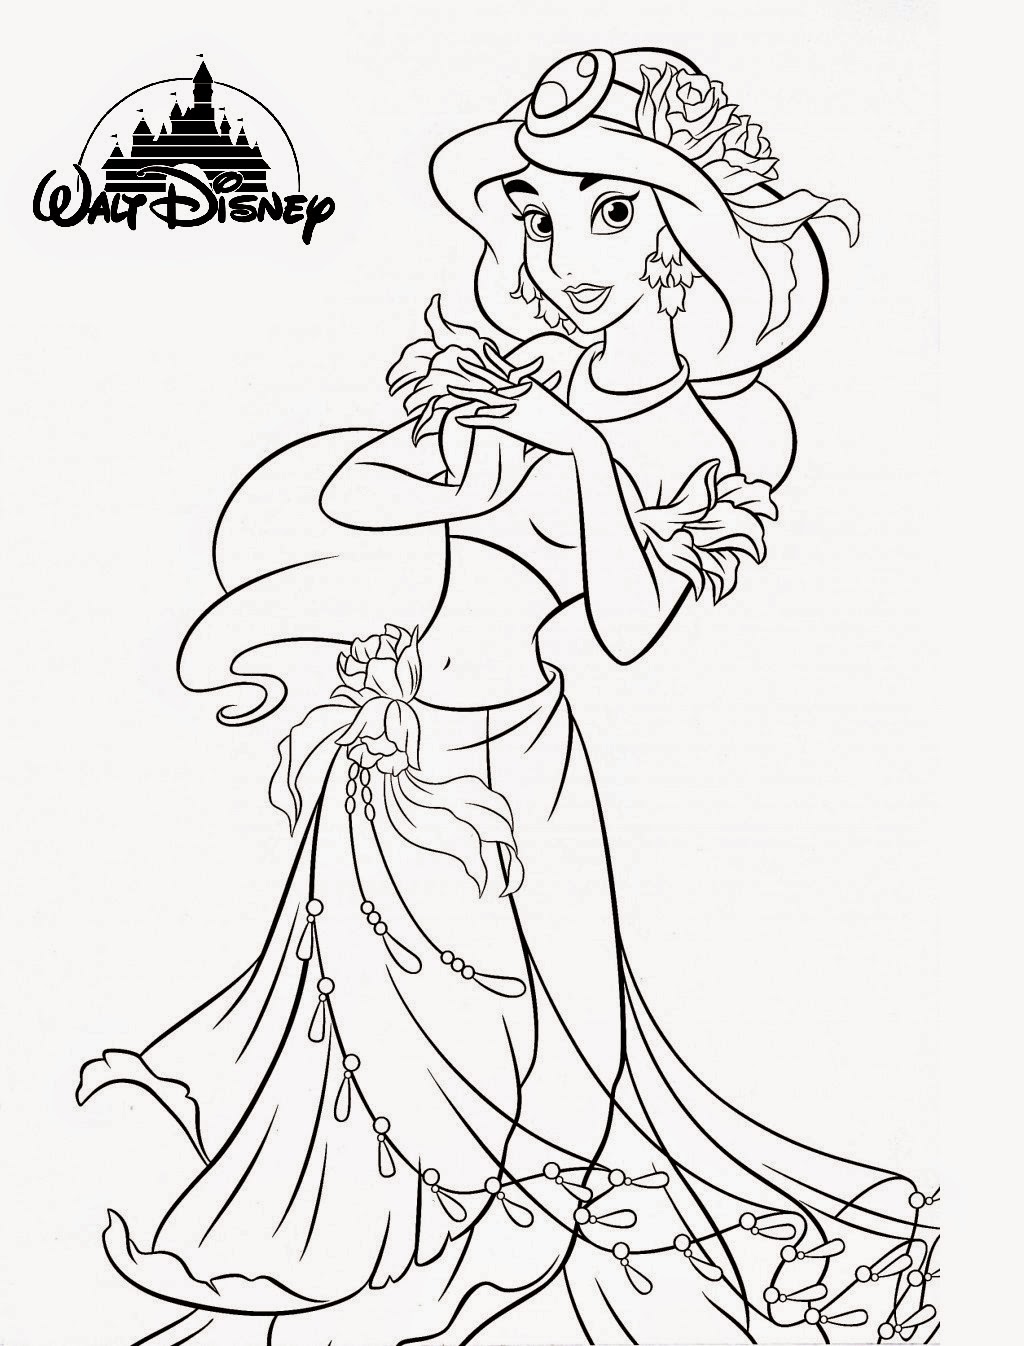 free-printable-coloring-pages-of-disney-characters-at-getdrawings